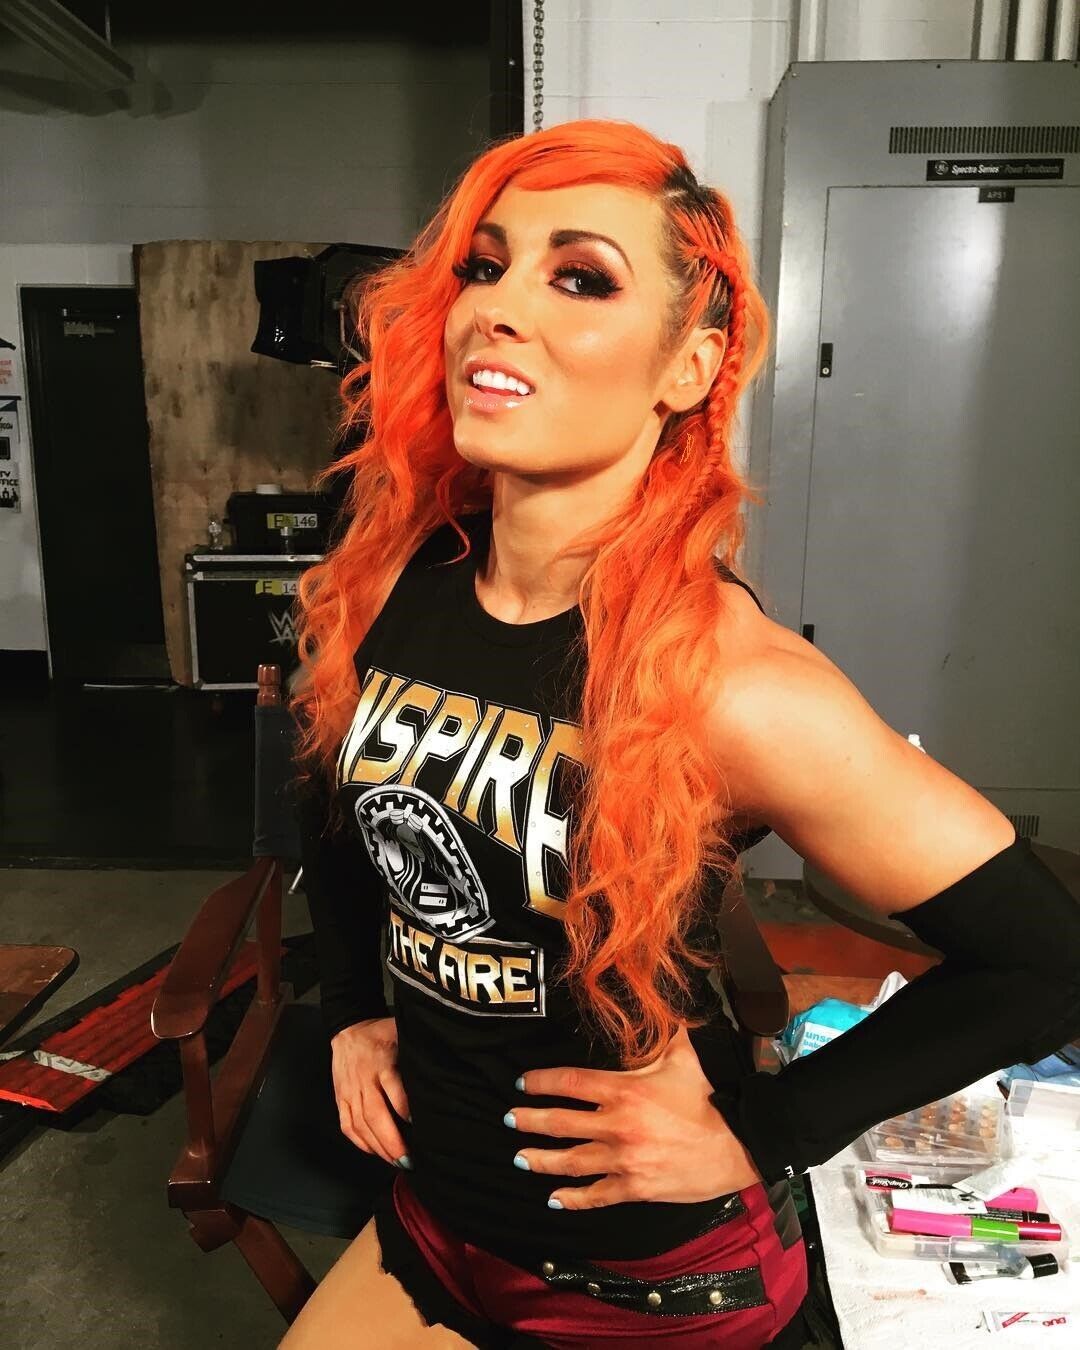 charles tidball recommends becky lynch nude pics pic